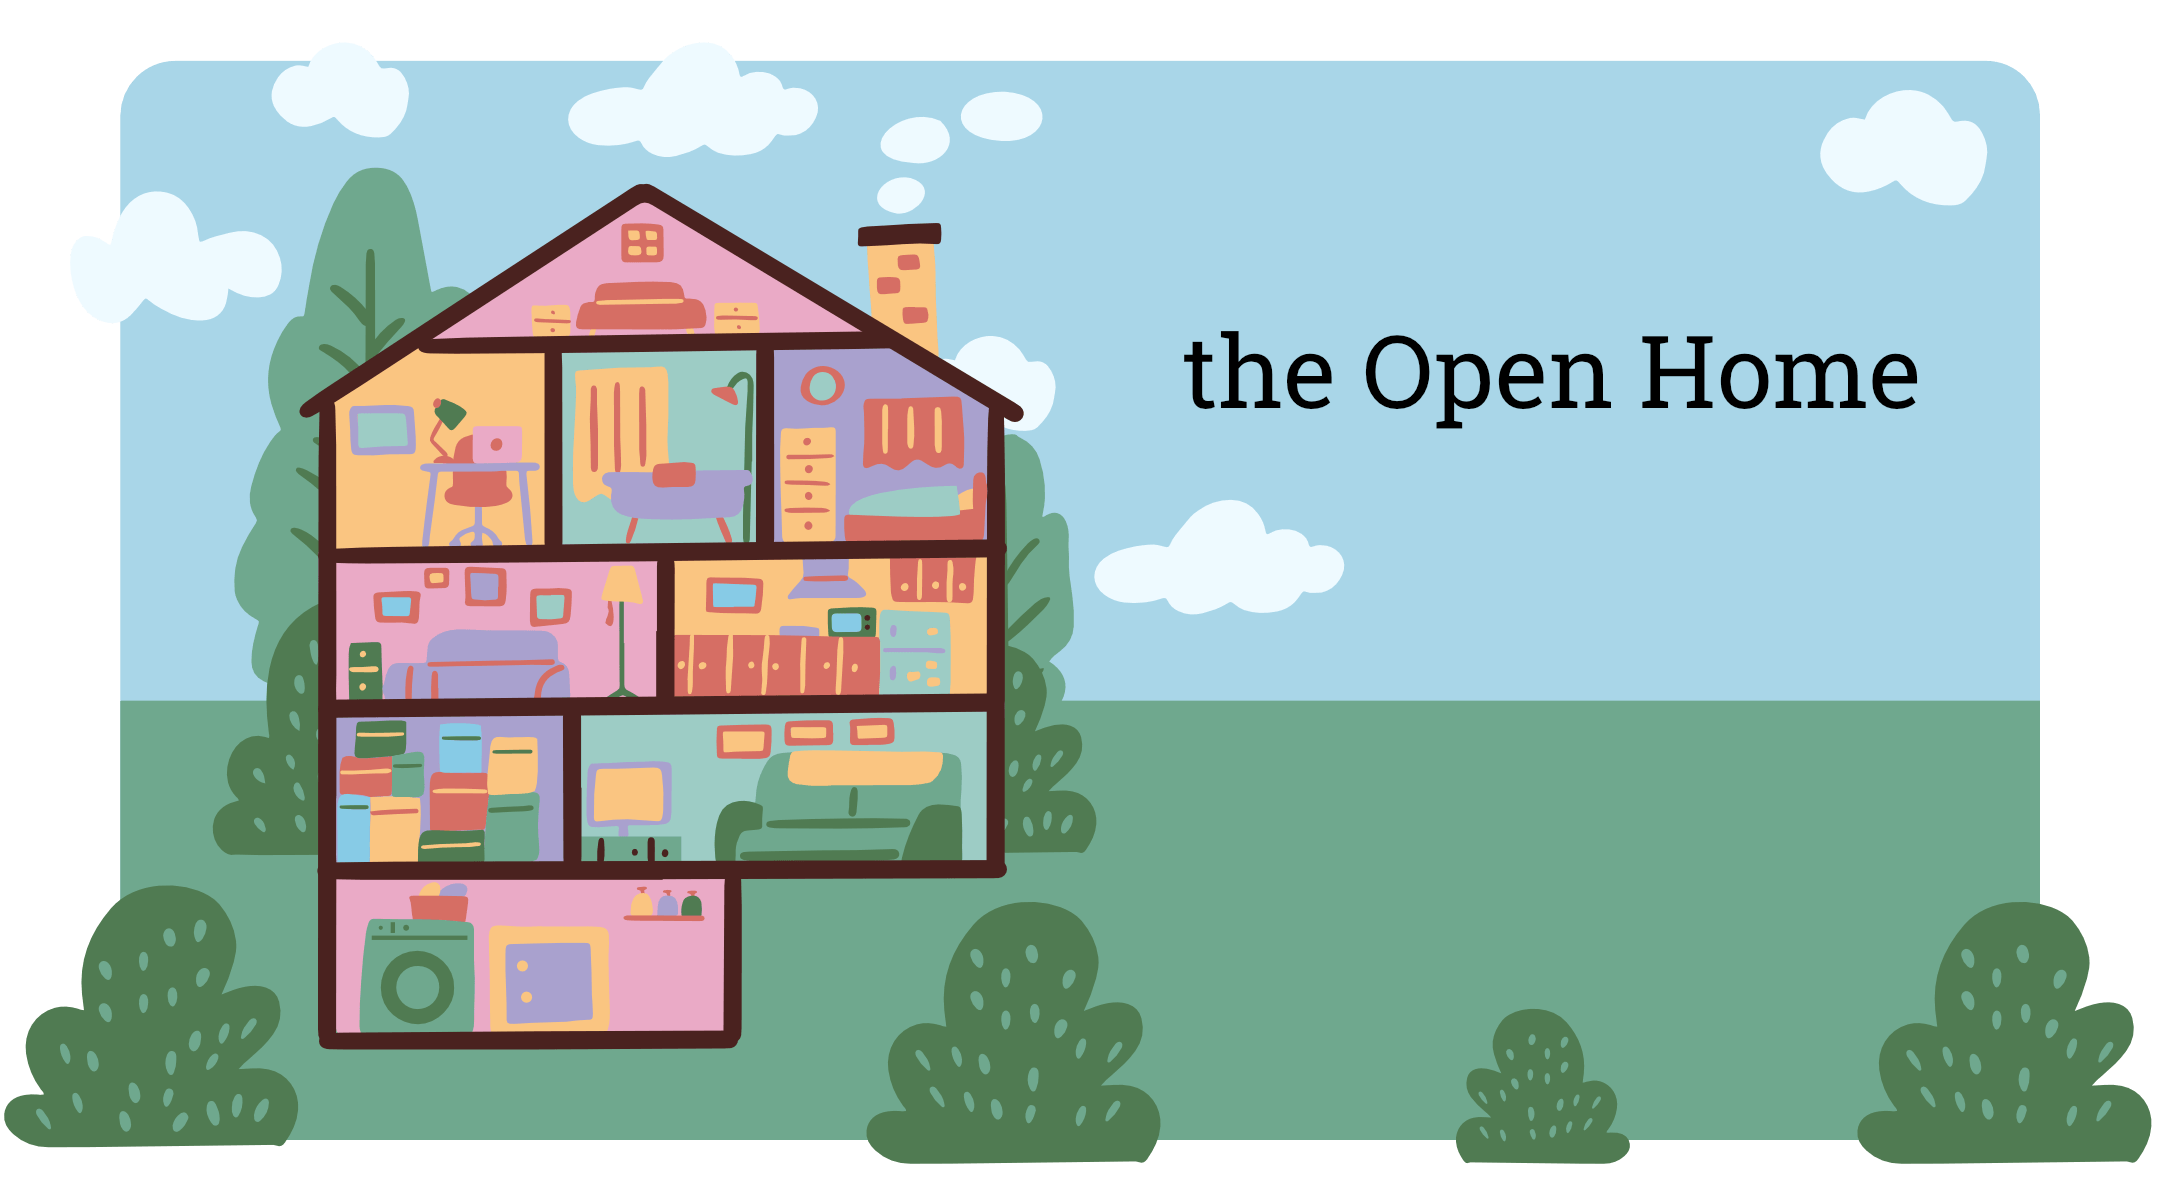 Building the Open Home: A new home for the newsletter